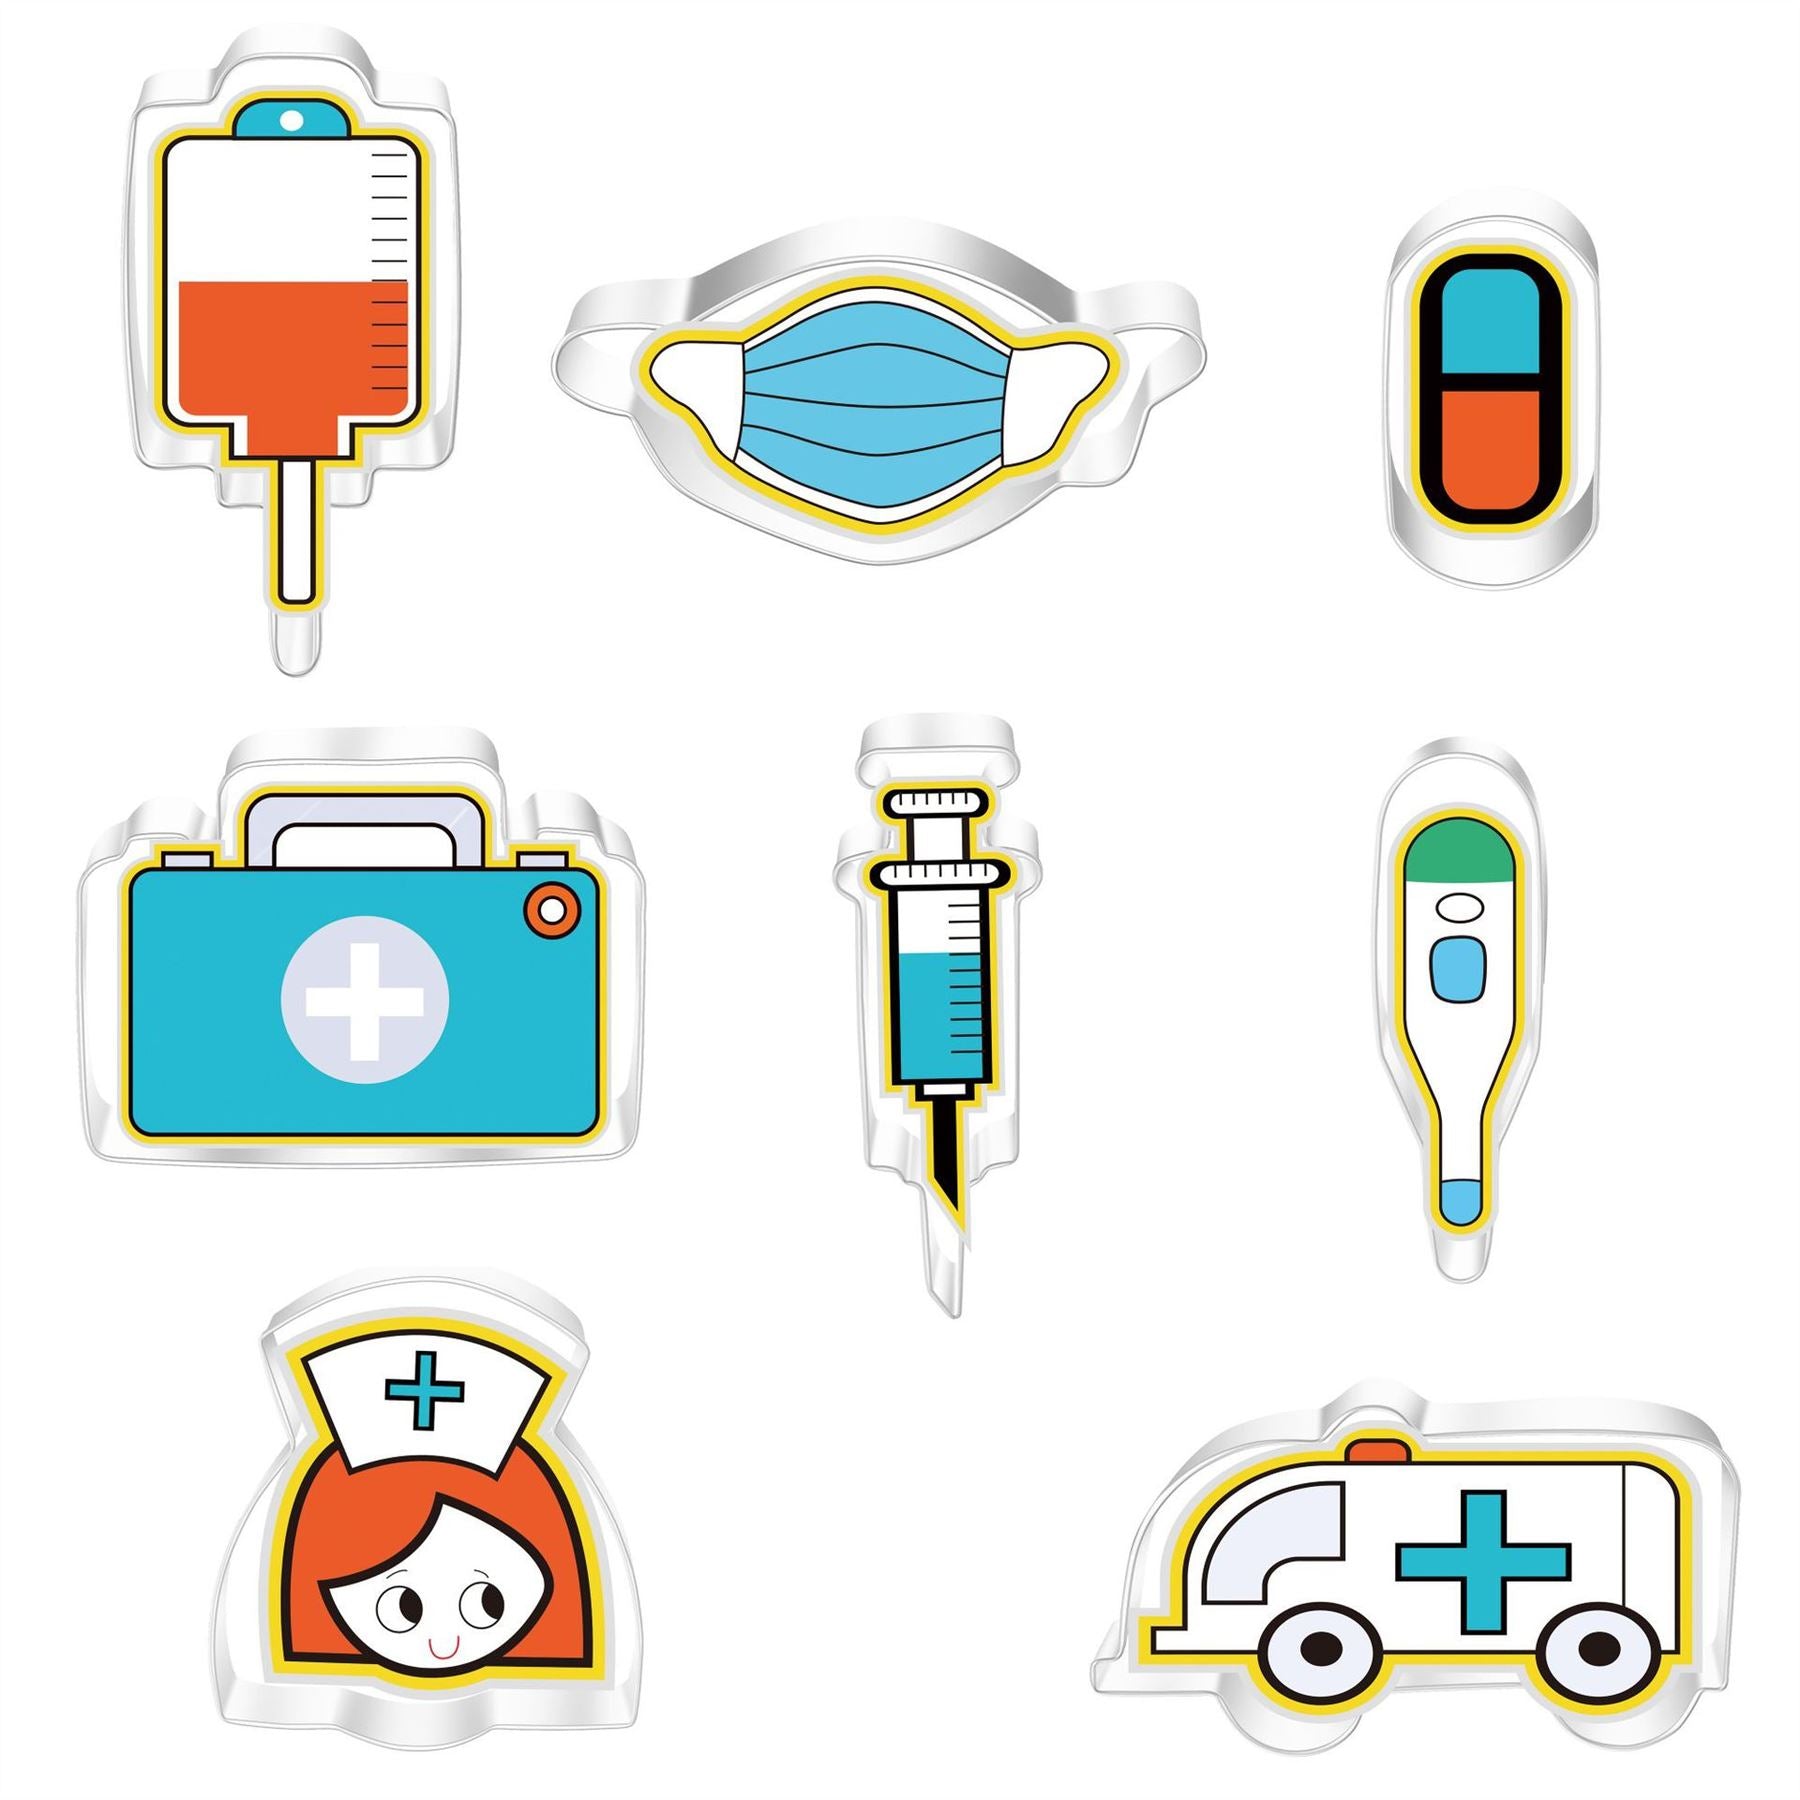 Stainless Steel Medical Kit Cookie Cutter and Cake Molds - Ambulance, First aid kit, and other shapes Biscuit cutter